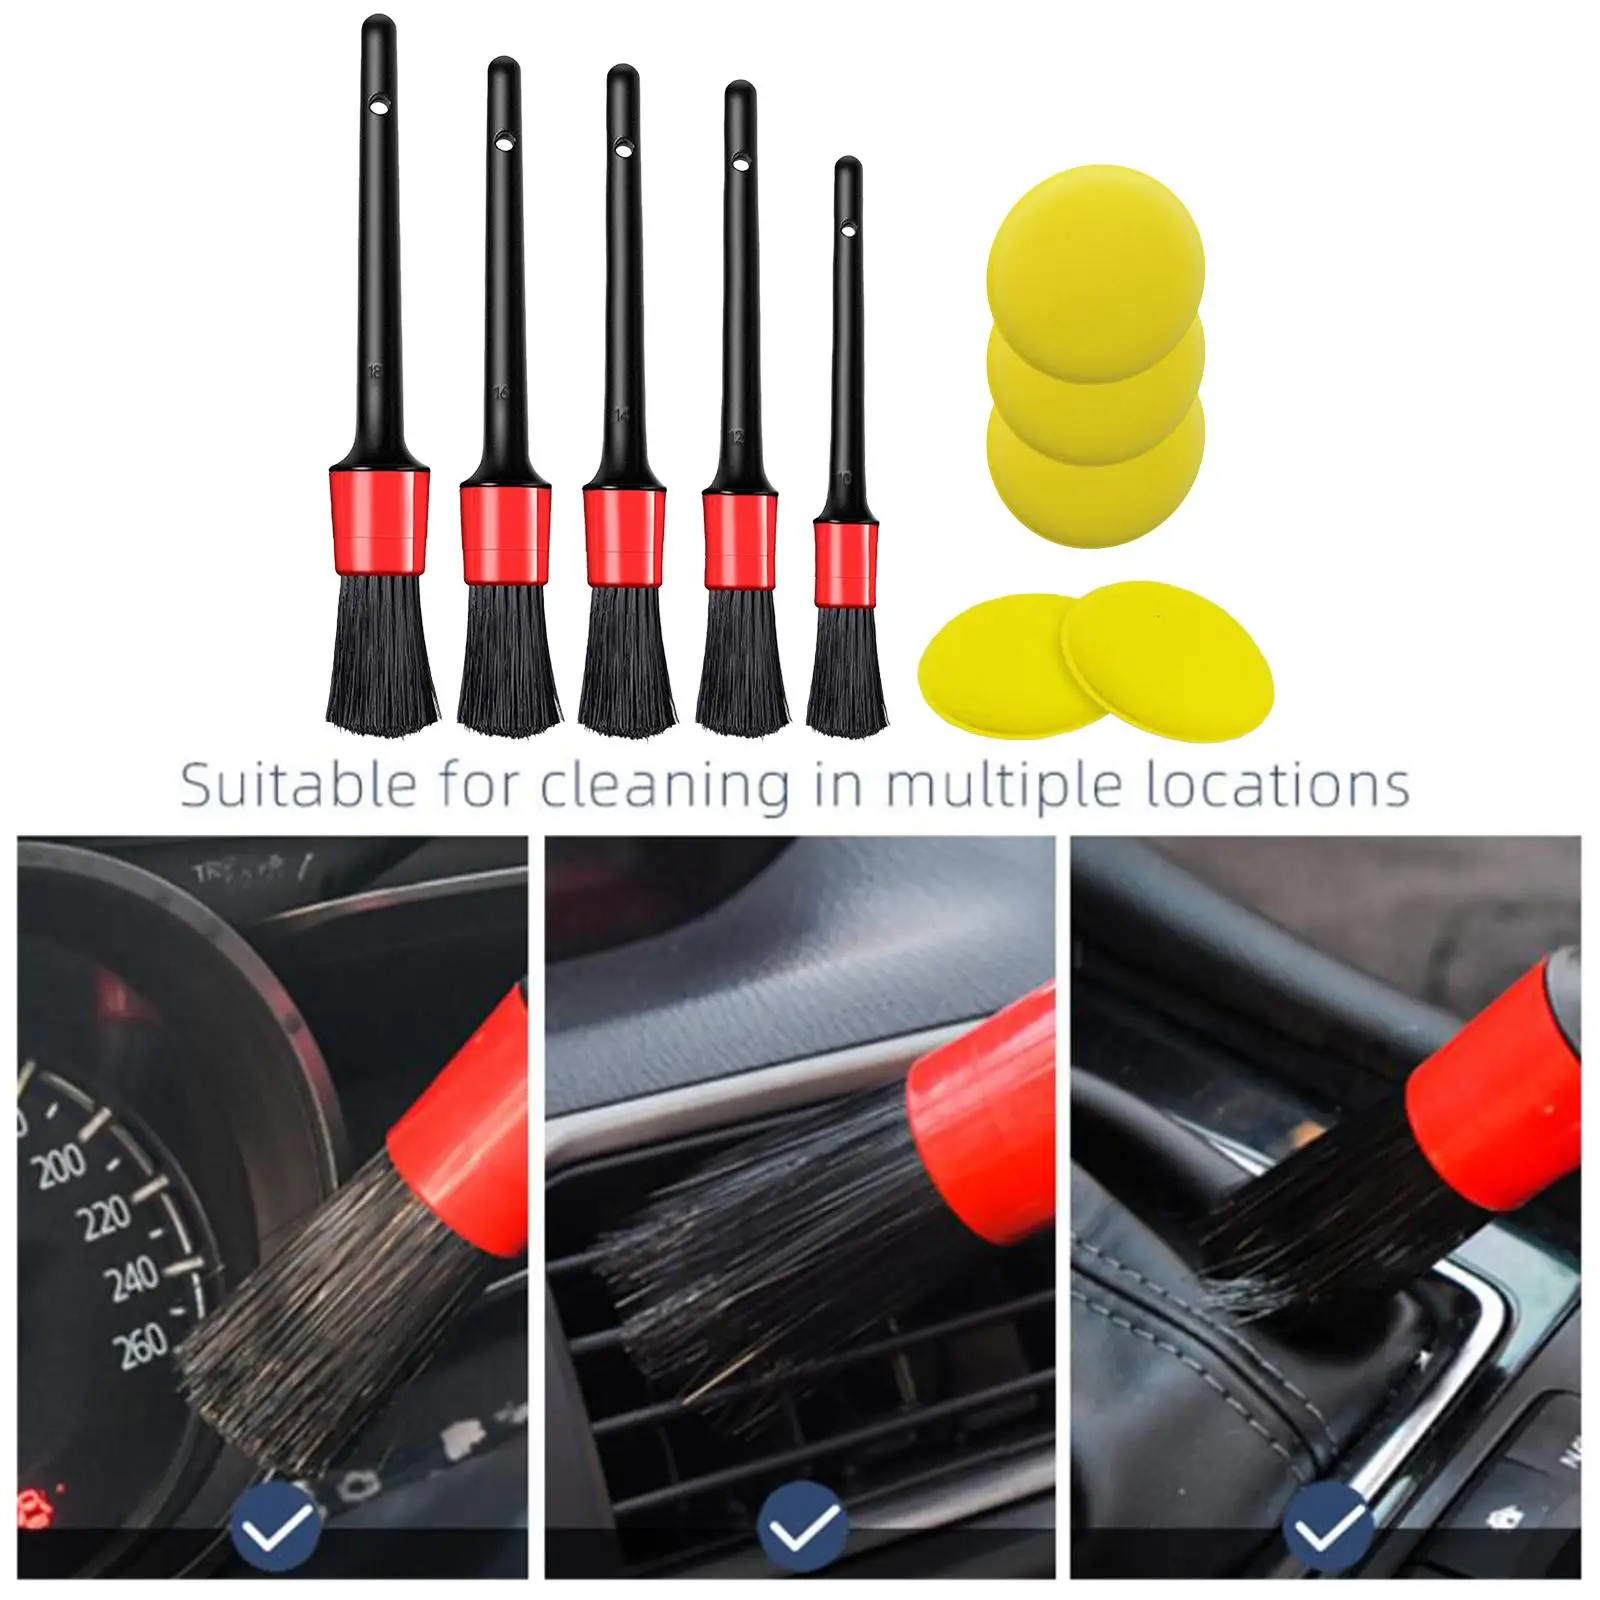 5x Auto Detailing Brush Set Detail Cleaner Brushes Fit for Seat Wheel Interior Exterior